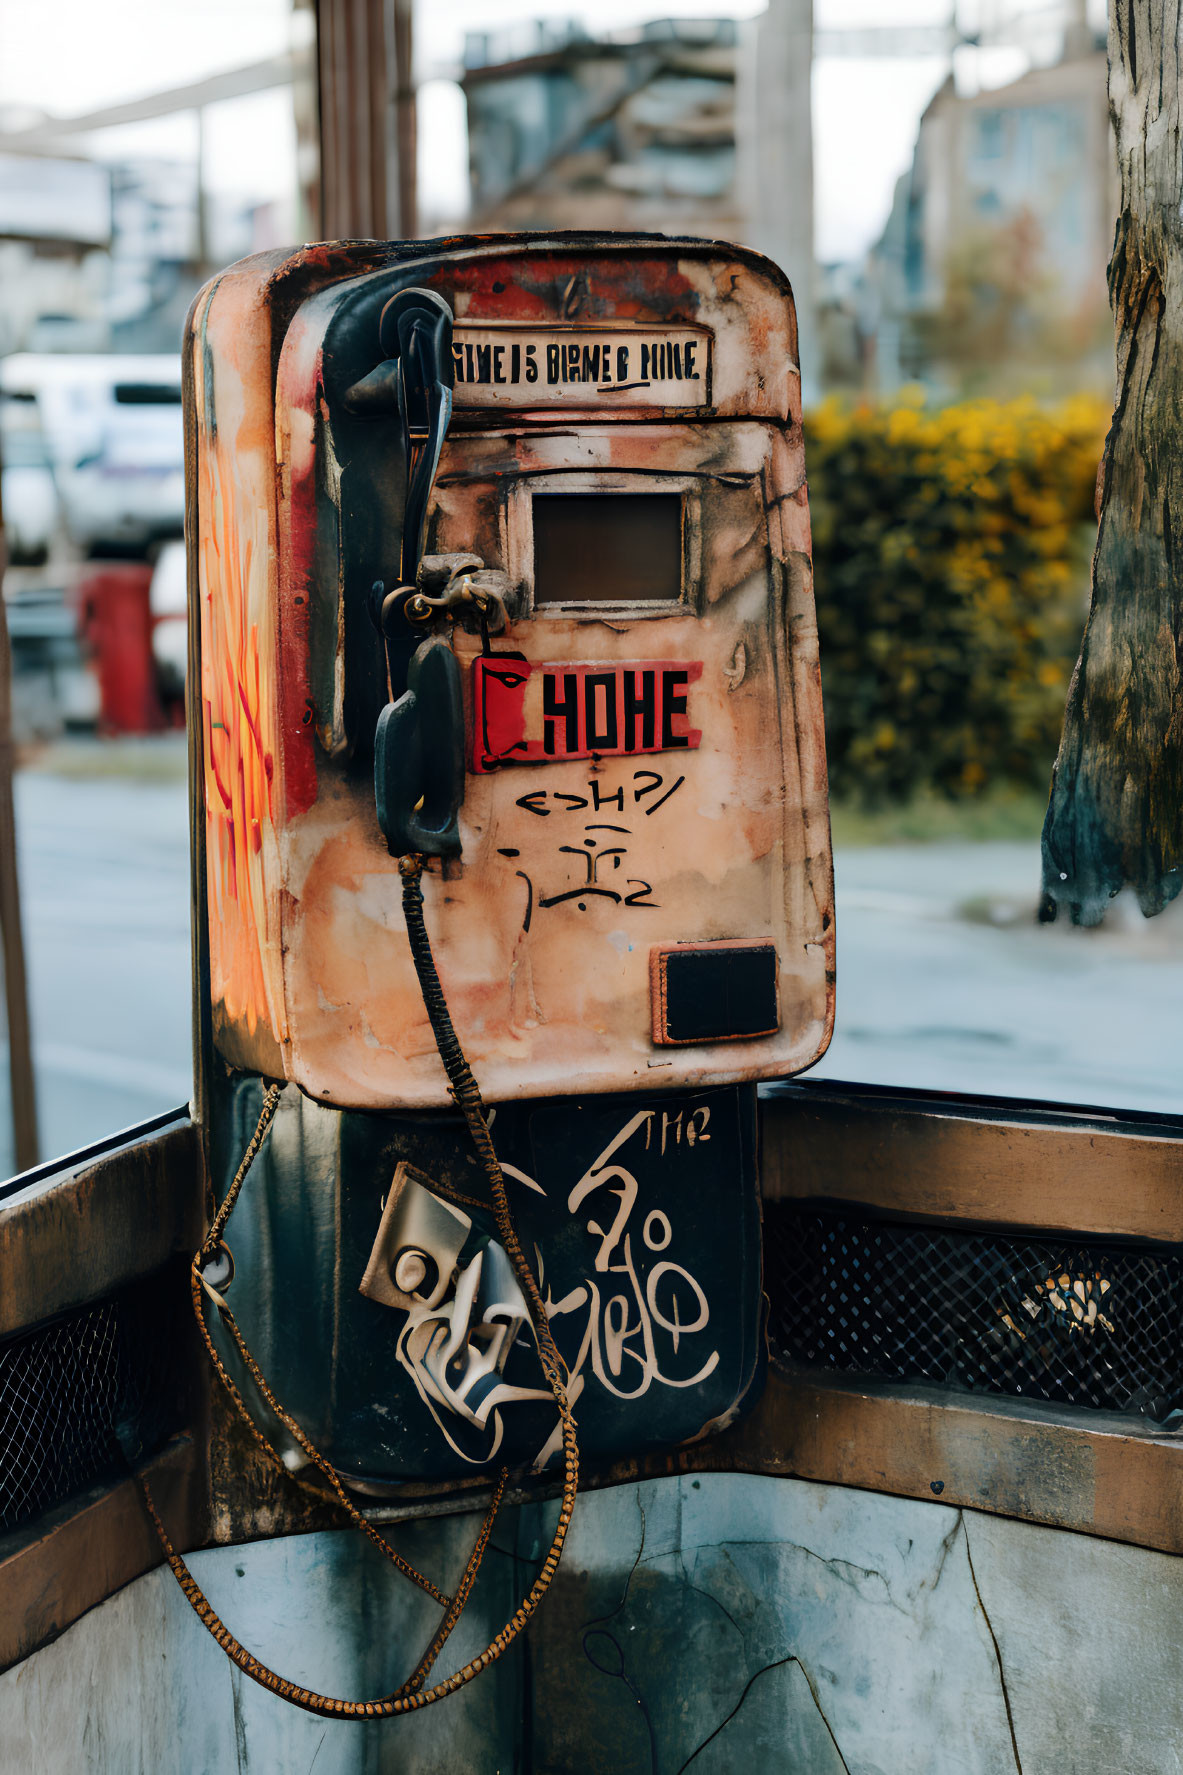 Vandalized payphone with graffiti and dangling handset in public booth